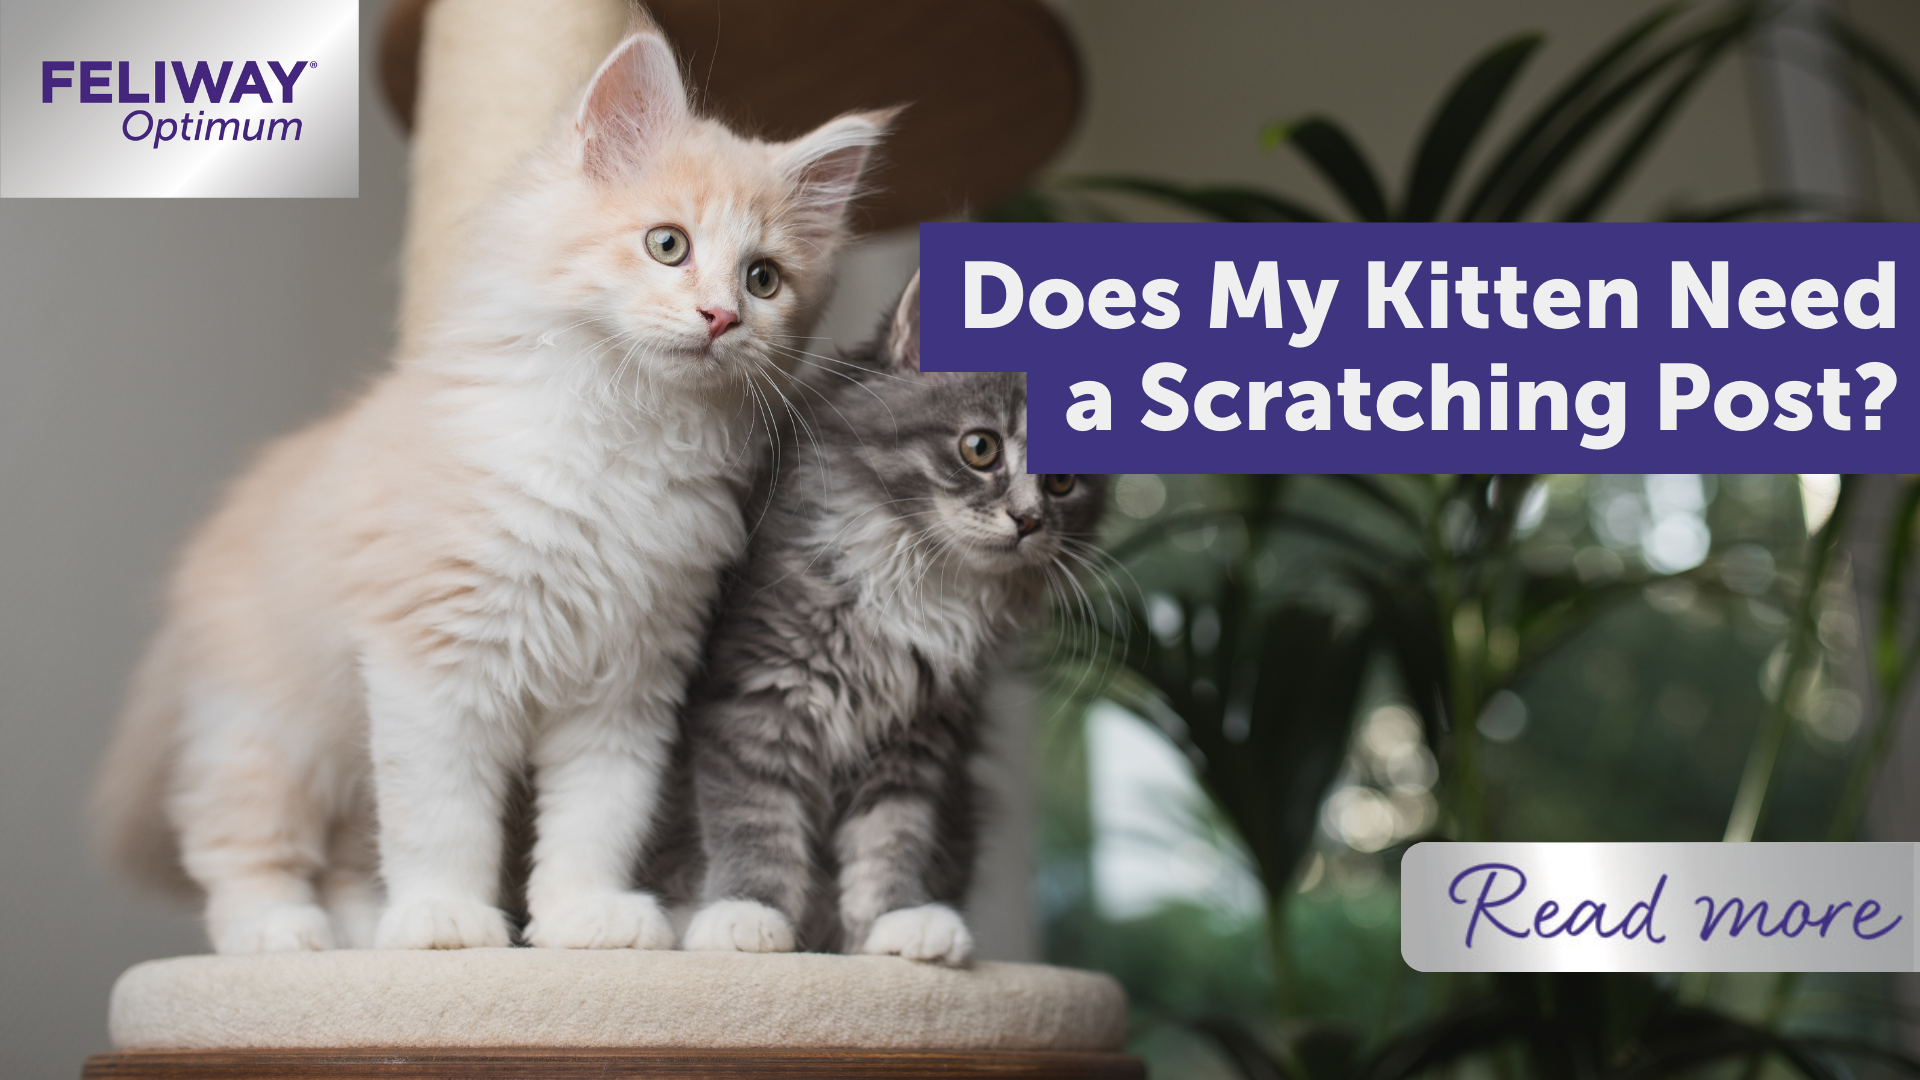 Does My Kitten Need a Scratching Post?